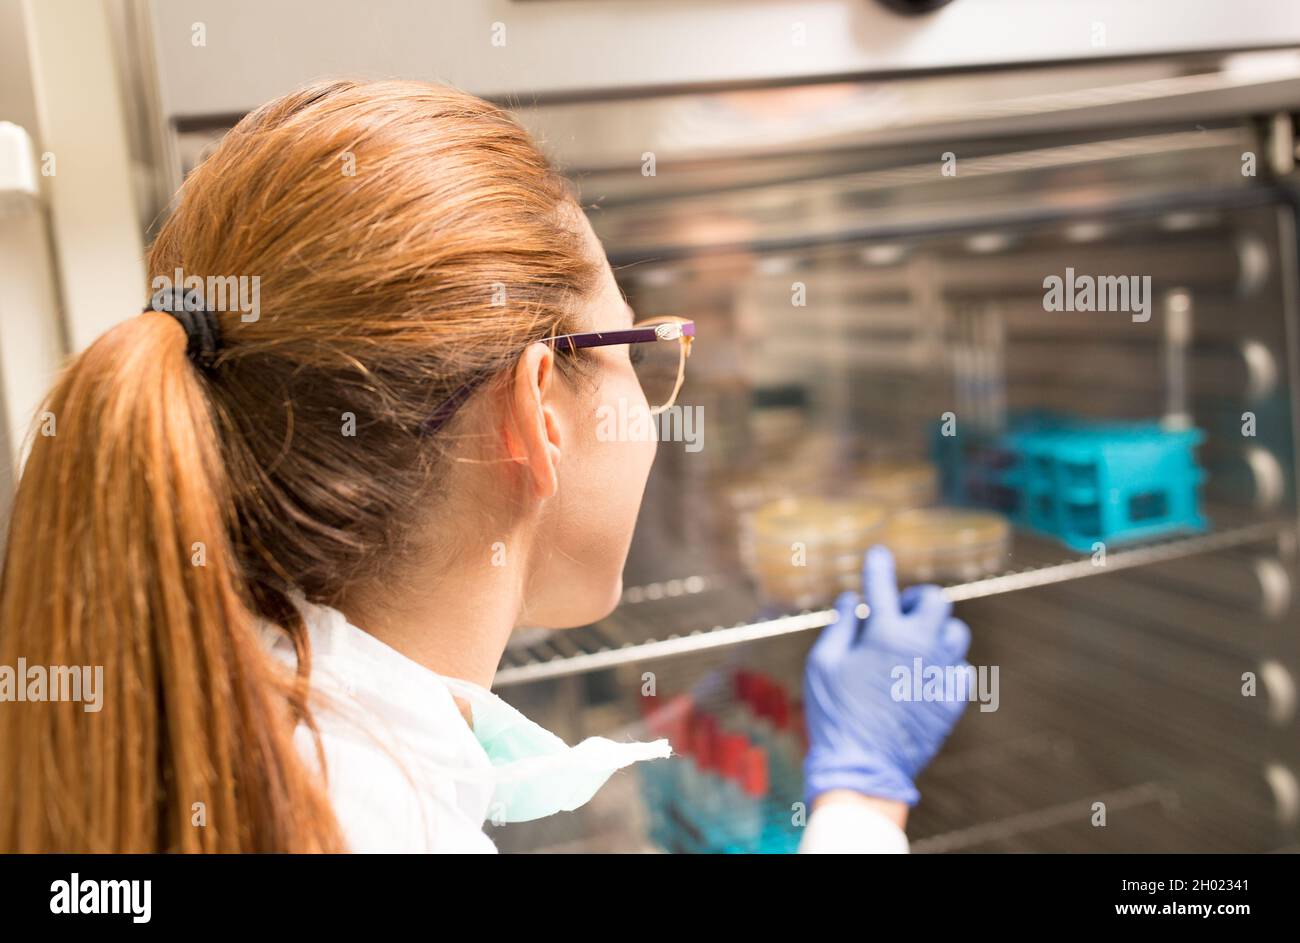 Woman biologist in white coat opening incubator in laboratory and taking out samples Stock Photo